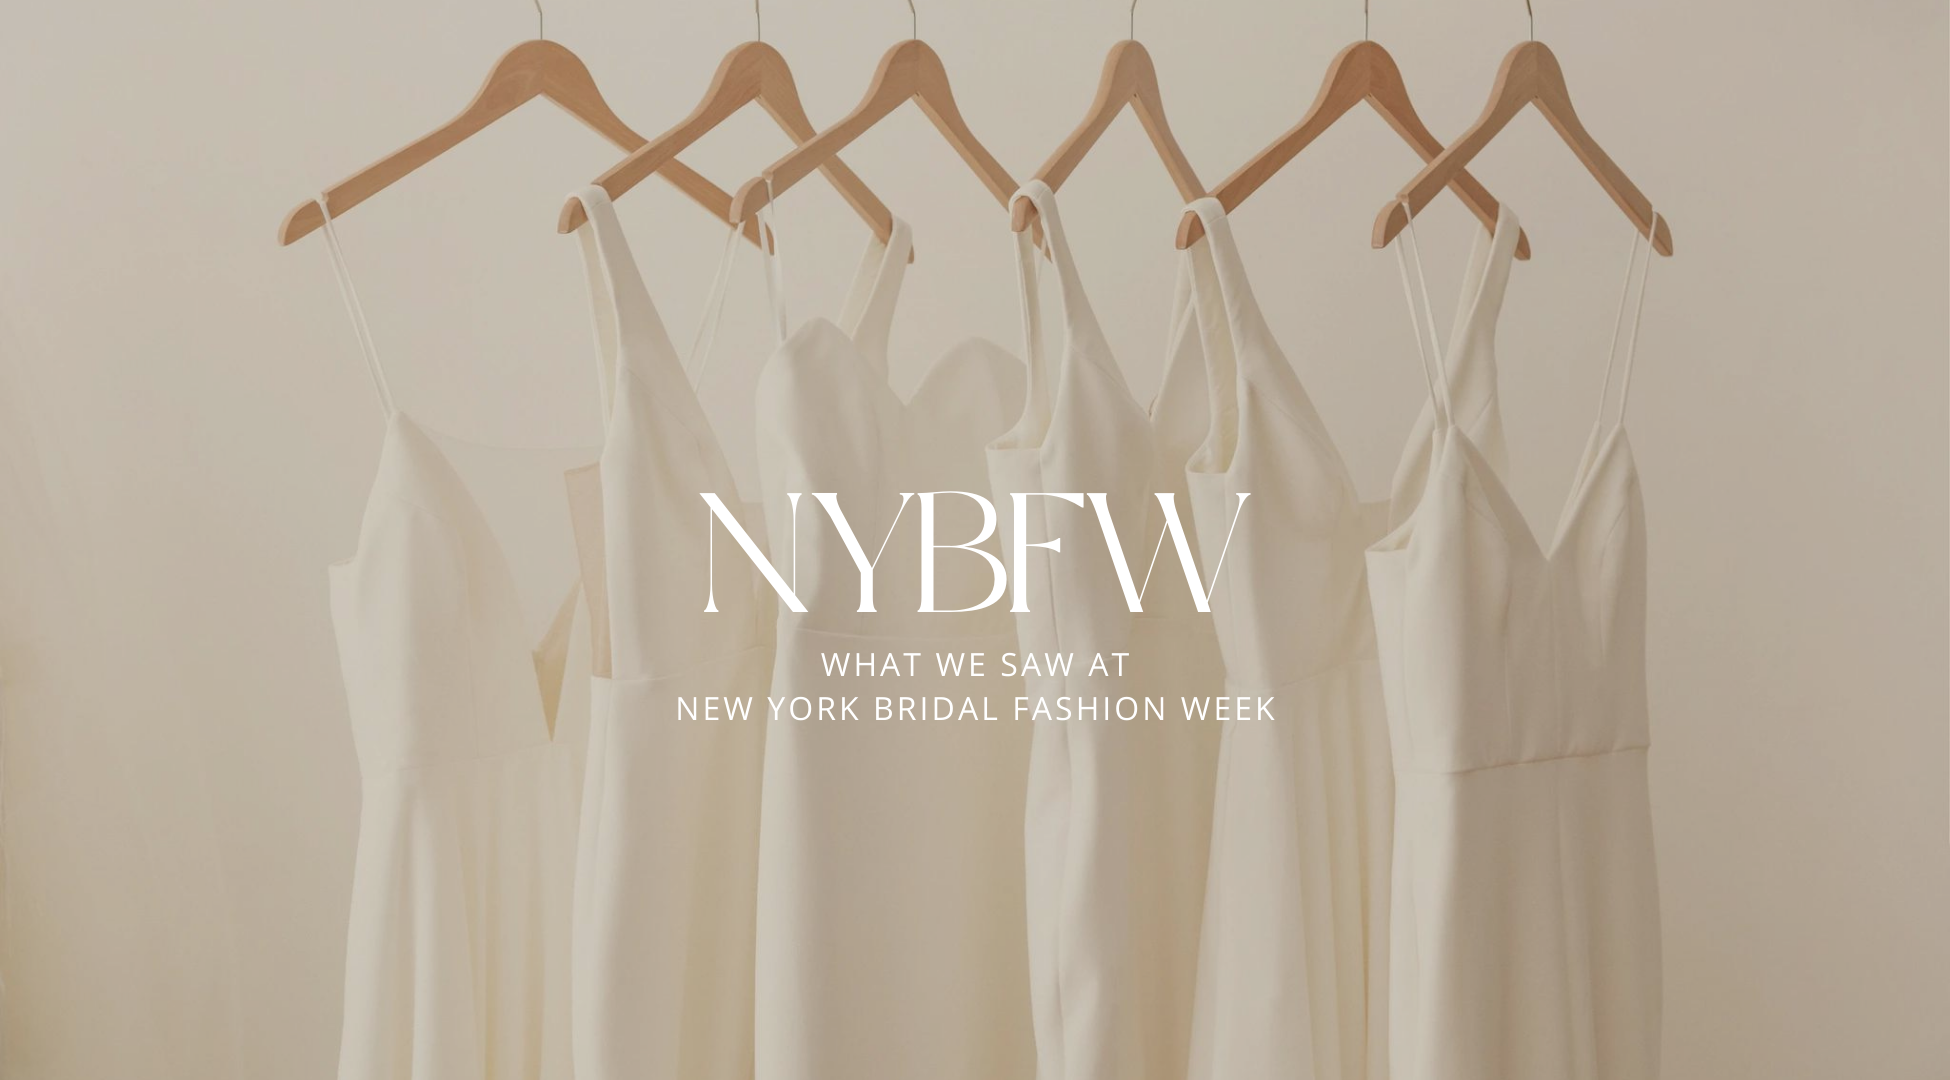 dresses on rack and text that reads NYBFW What we saw at New York Bridal Fashion week